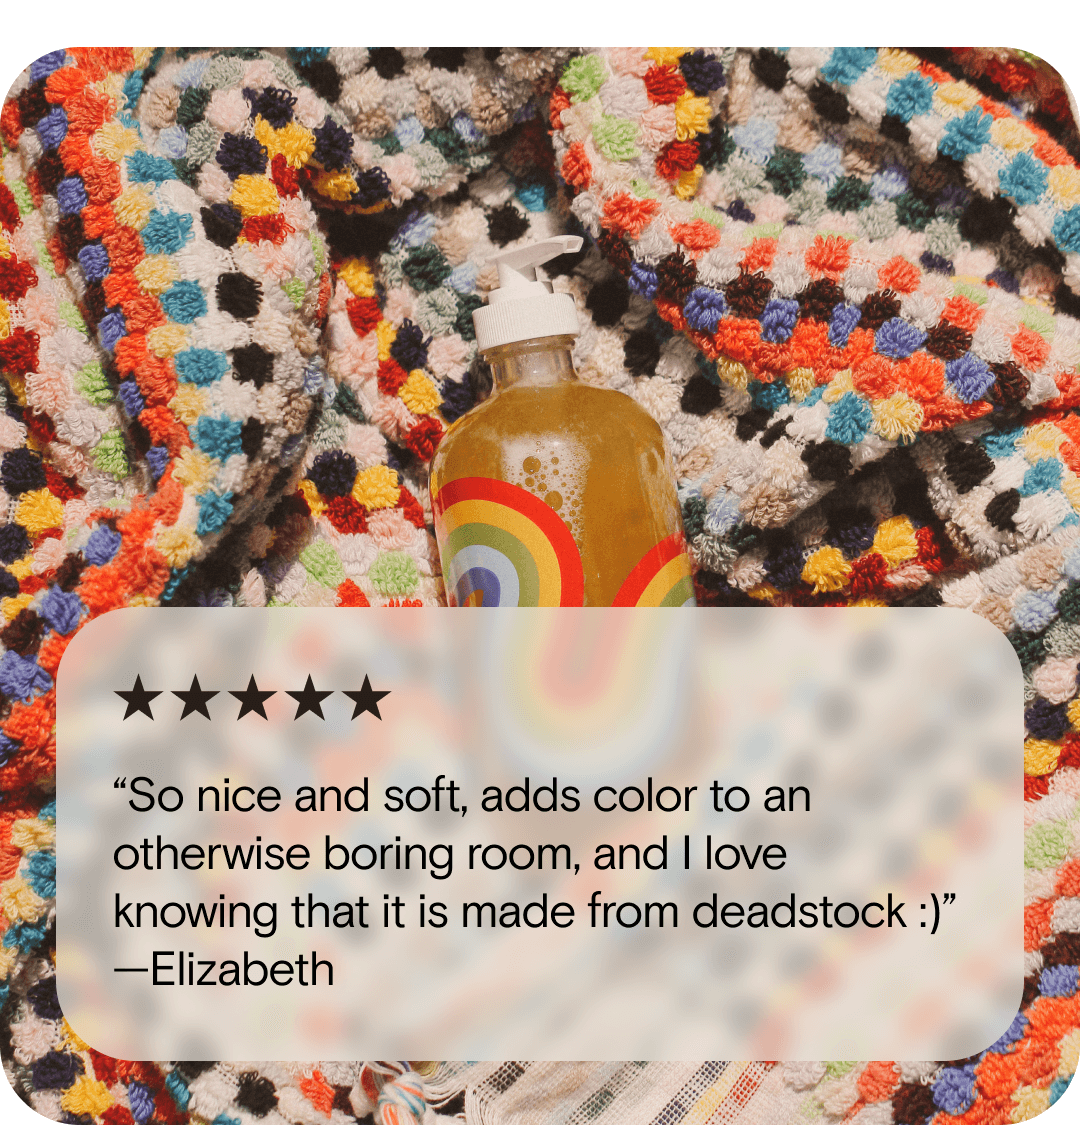 5 stars: “So nice and soft, adds color to an otherwise boring room, and I love knowing that it is made from deadstock :)” —Elizabeth